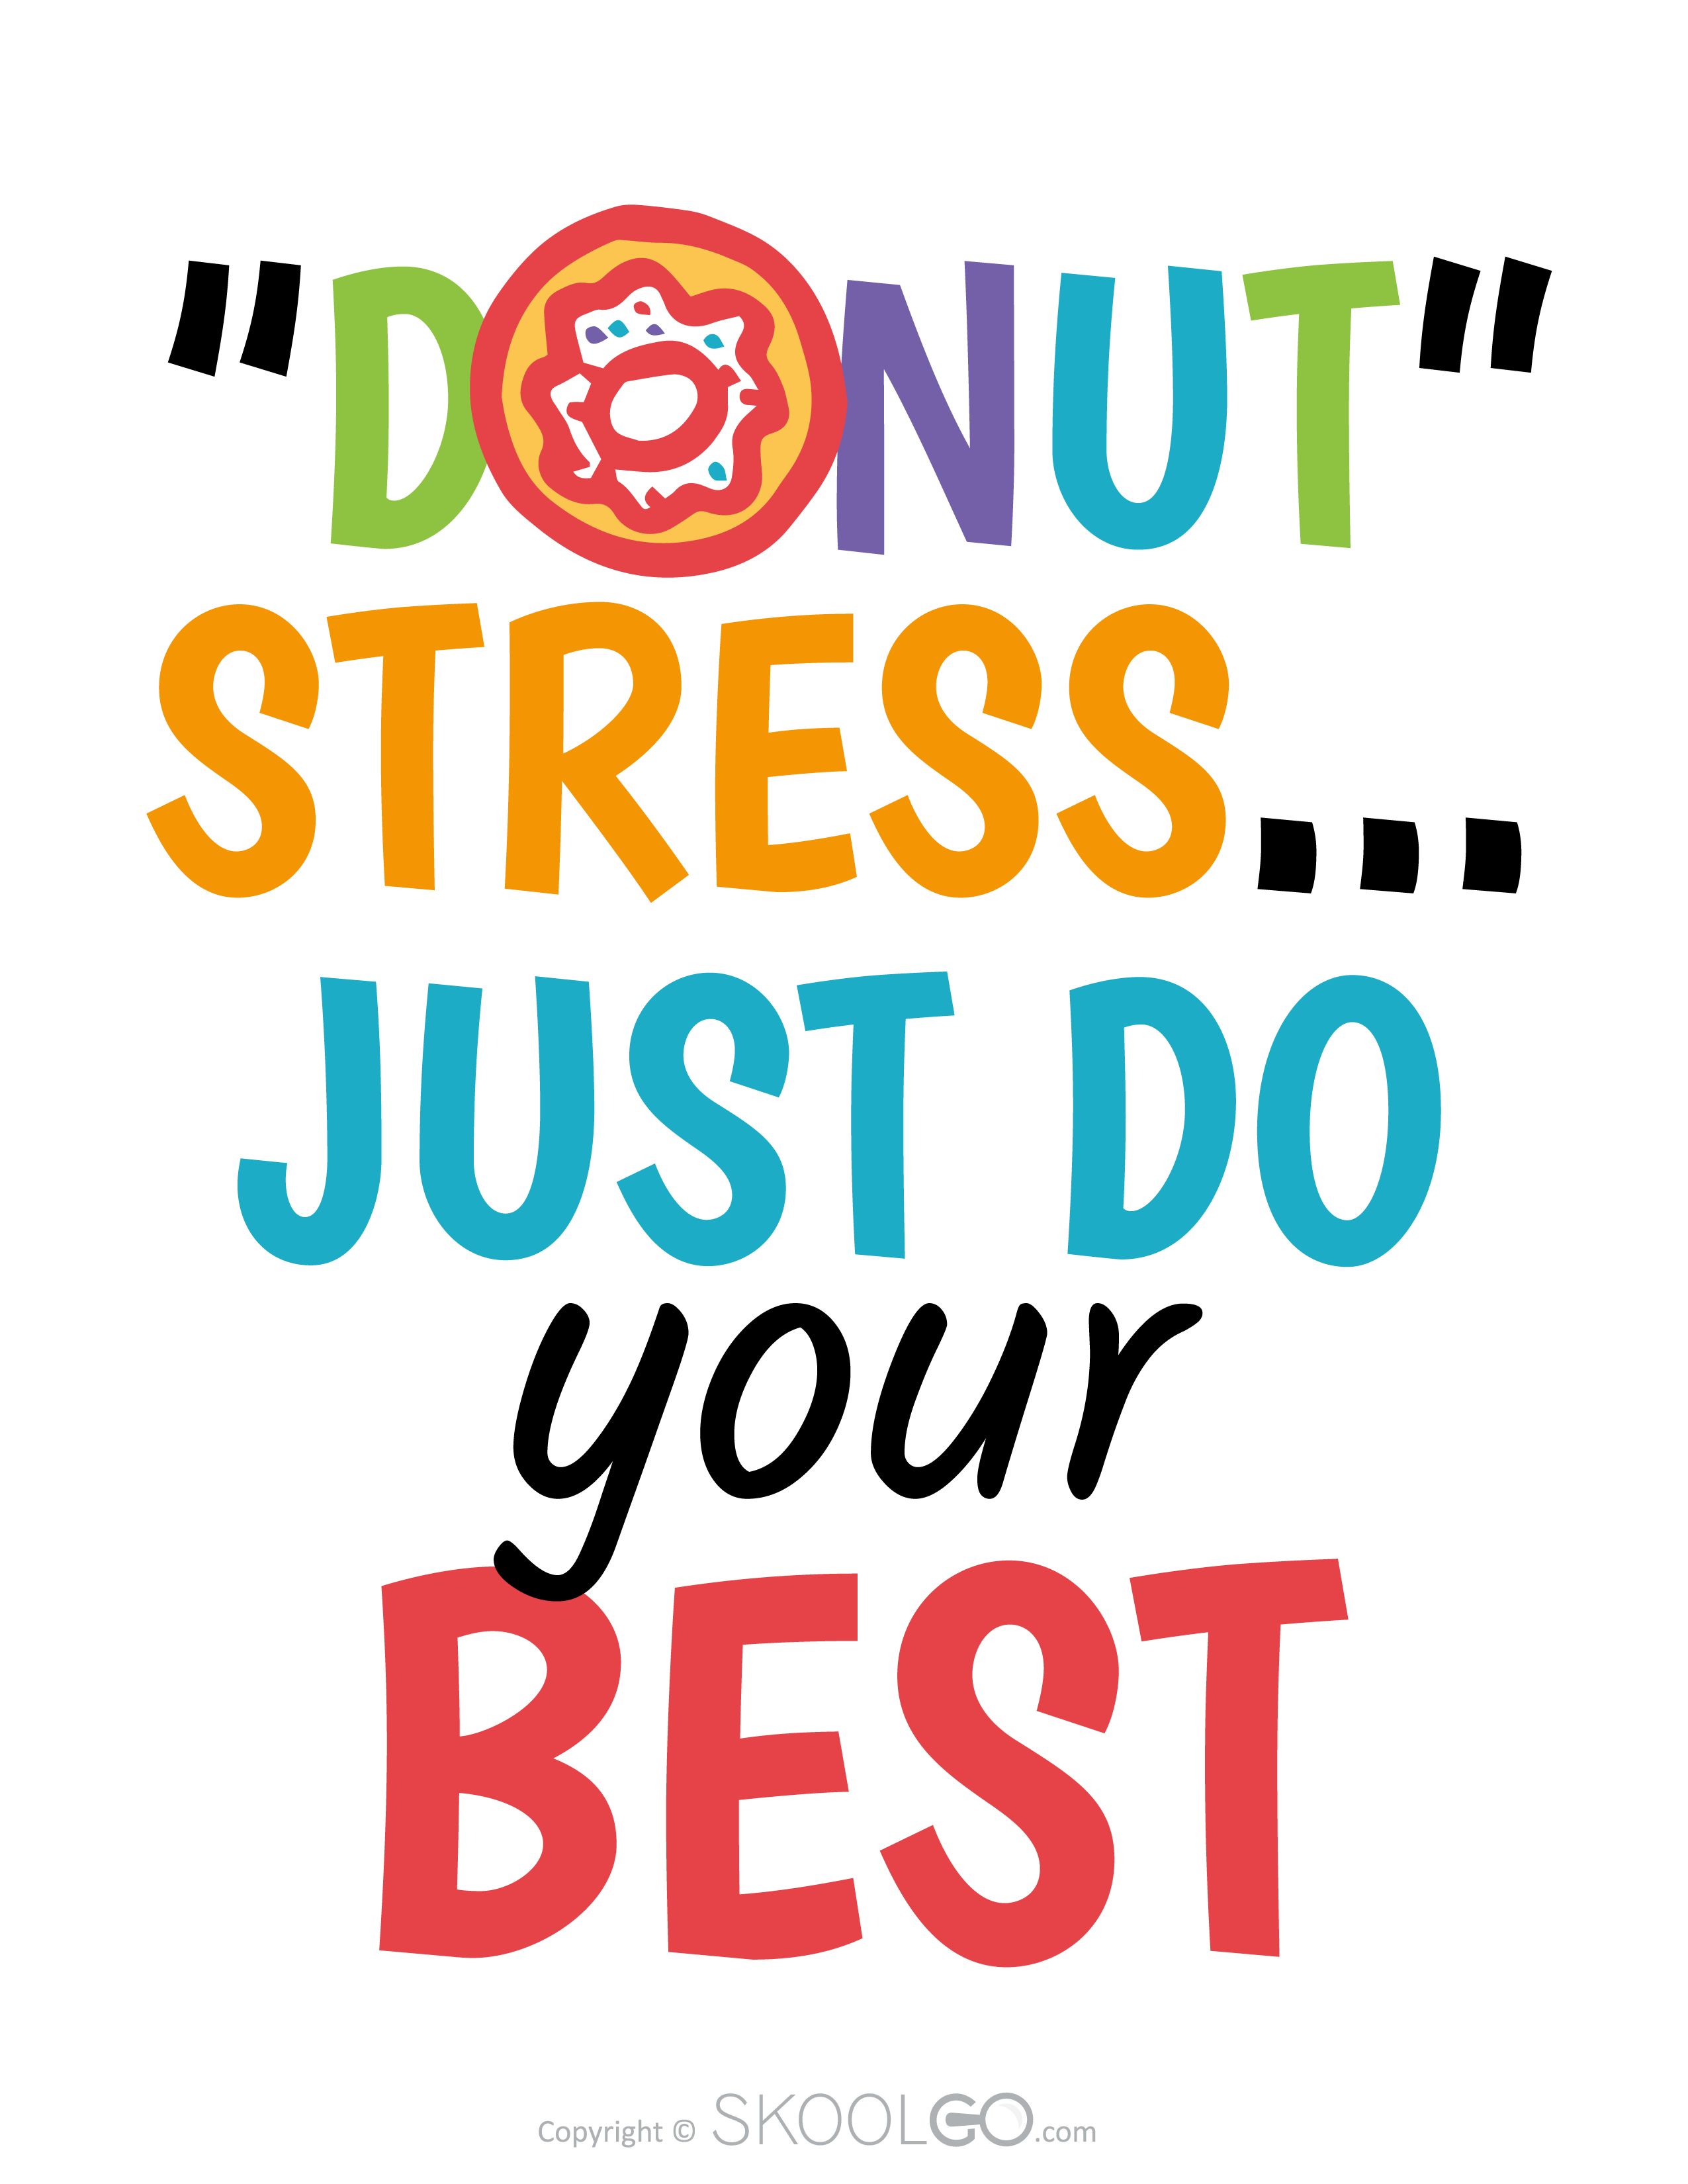 Donut Stress Just Do Your Best - Free Poster